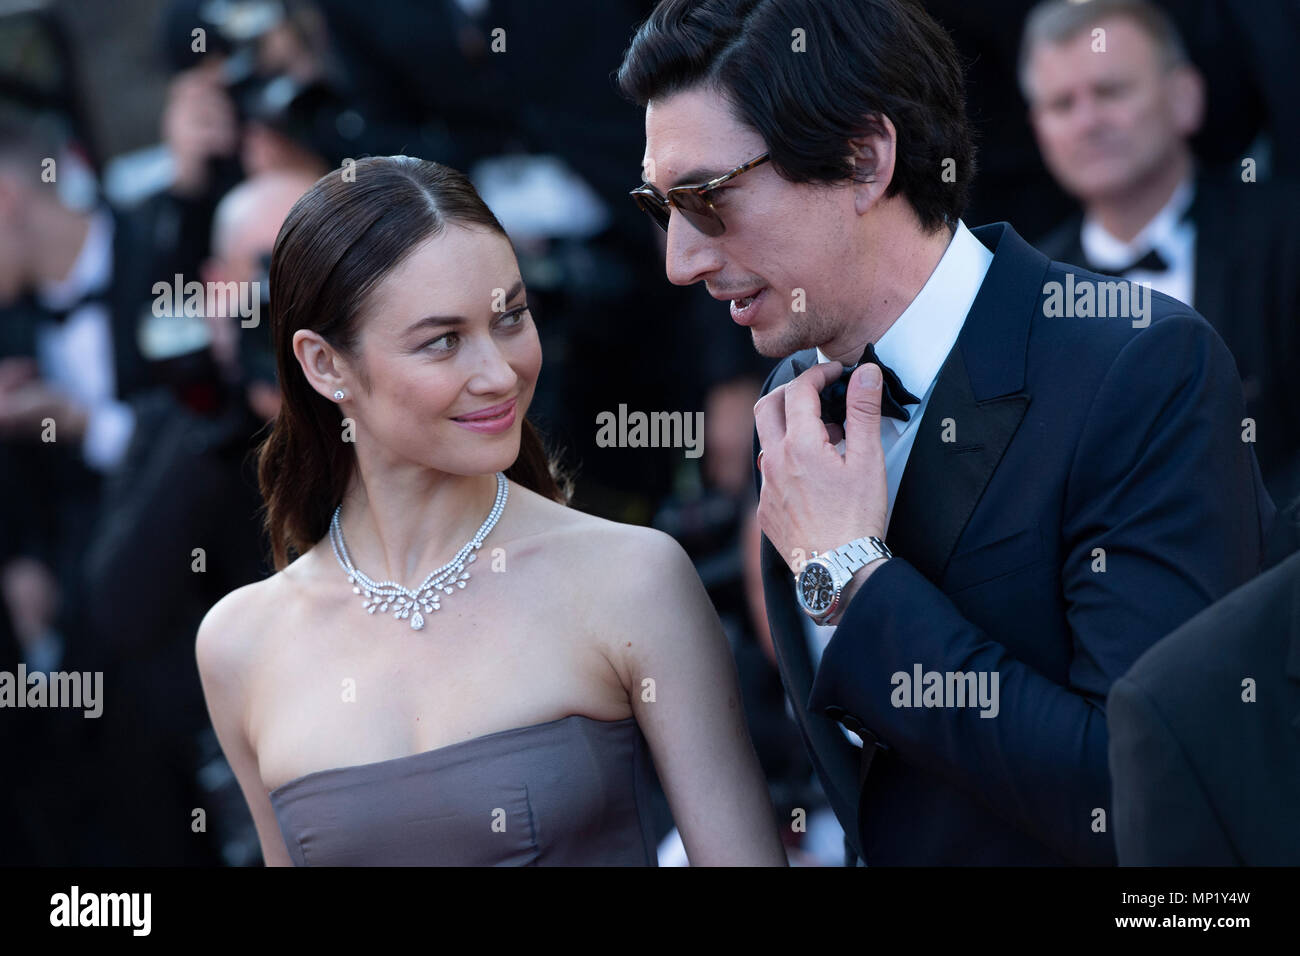 CANNES, FRANCE - MAY 19: Adam Driver and Olga Kurylenko attend at the Closing Ceremony & screening of 'The Man Who Killed Don Quixote' during the 71st annual Cannes Film Festival at Palais des Festivals on May May 19, 2018 in Cannes, France Credit: BTWImages/Alamy Live News Stock Photo